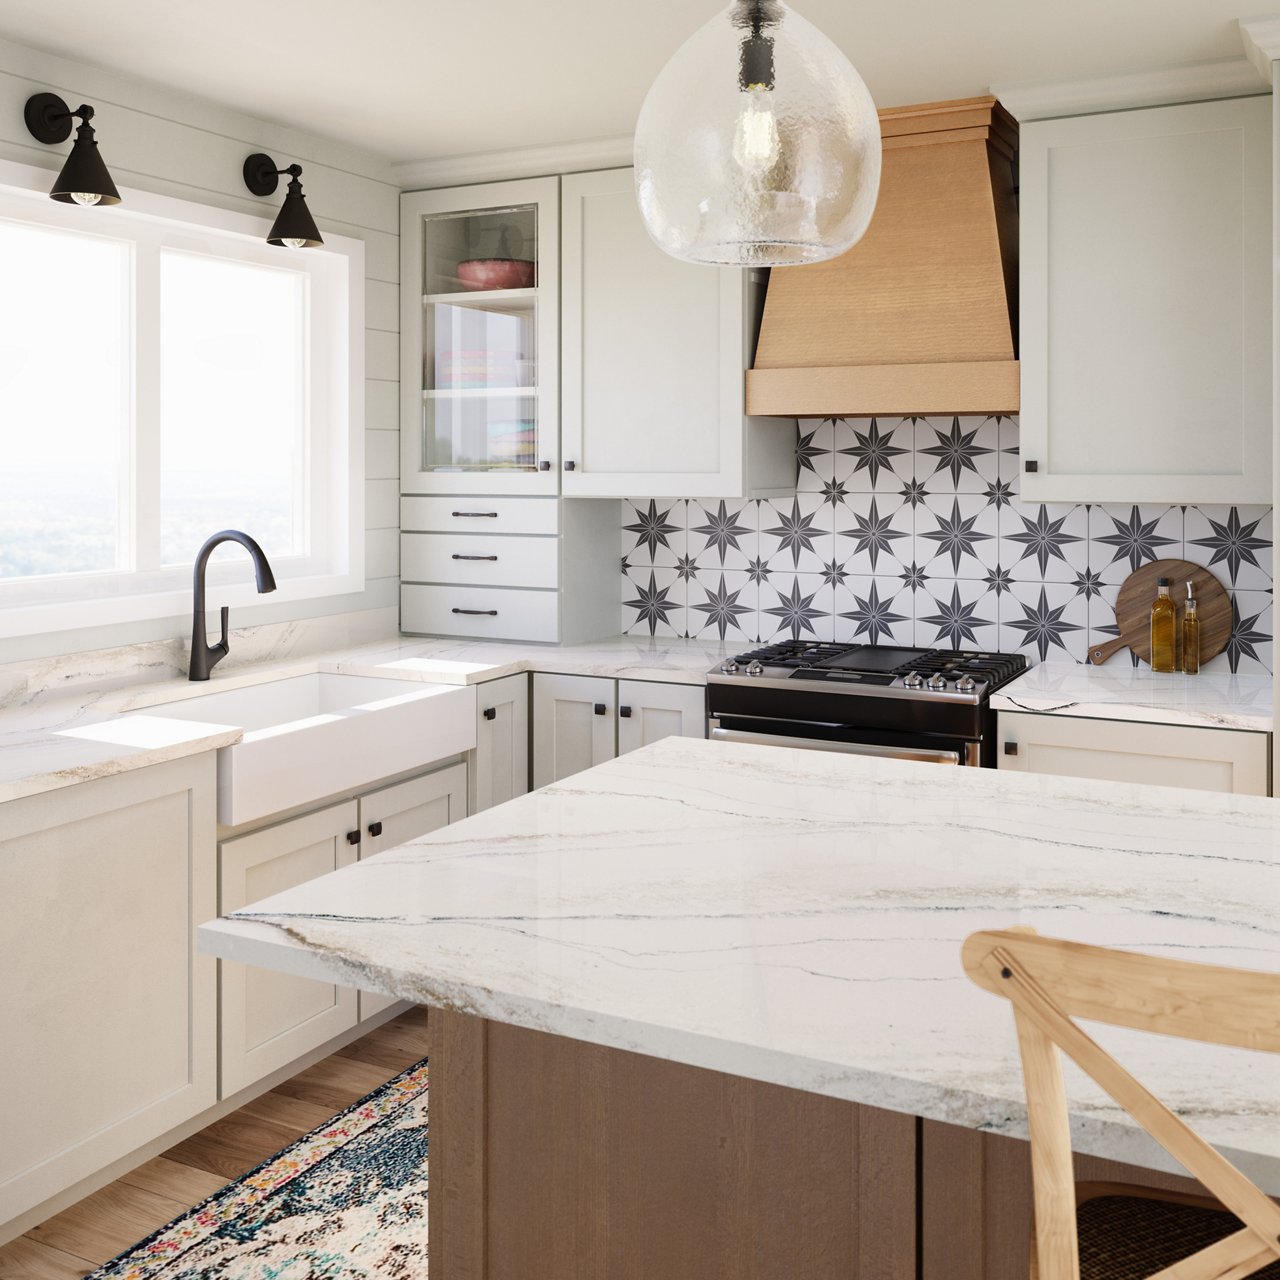 a neutral kitchen with white cabinets topped with white quartz countertops, white farmhouse sink, black accents throughout, a center island white wood cabinets and white quartz countertops, a wooden hood over a range, and a geometric tile backsplash.